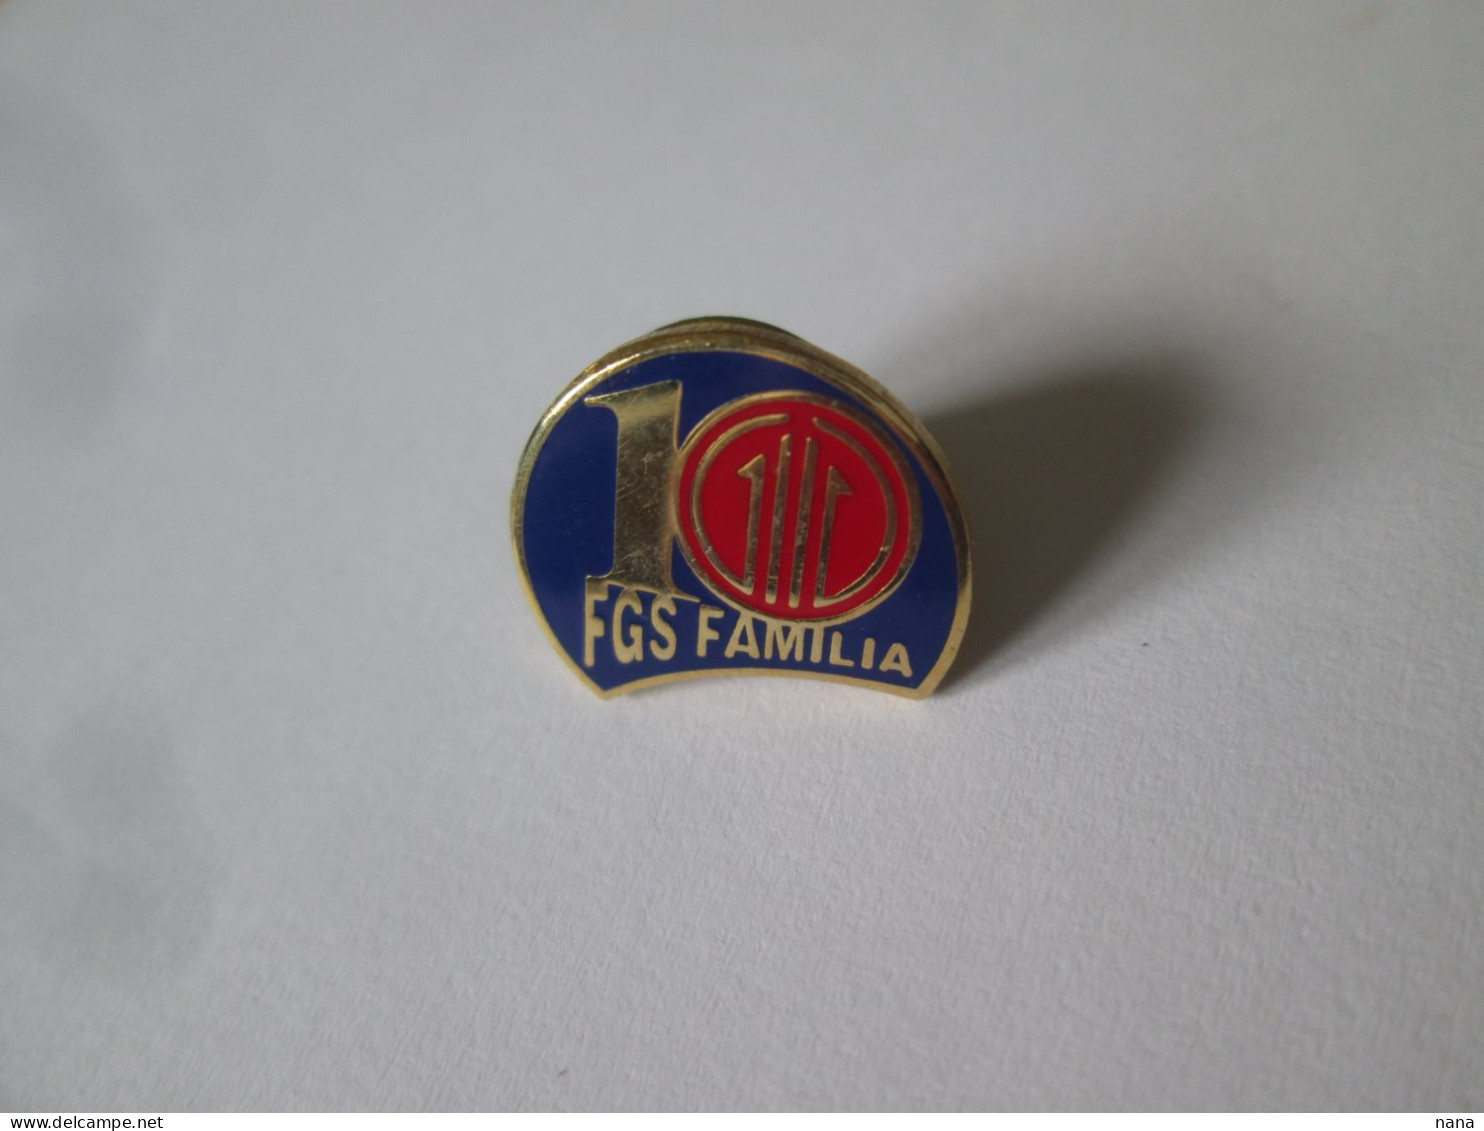 Roumanie Insigne/pin Du Syndicat Famille Vers 1990/Romania Family Trade Union Pin Badge 1990s - Associations